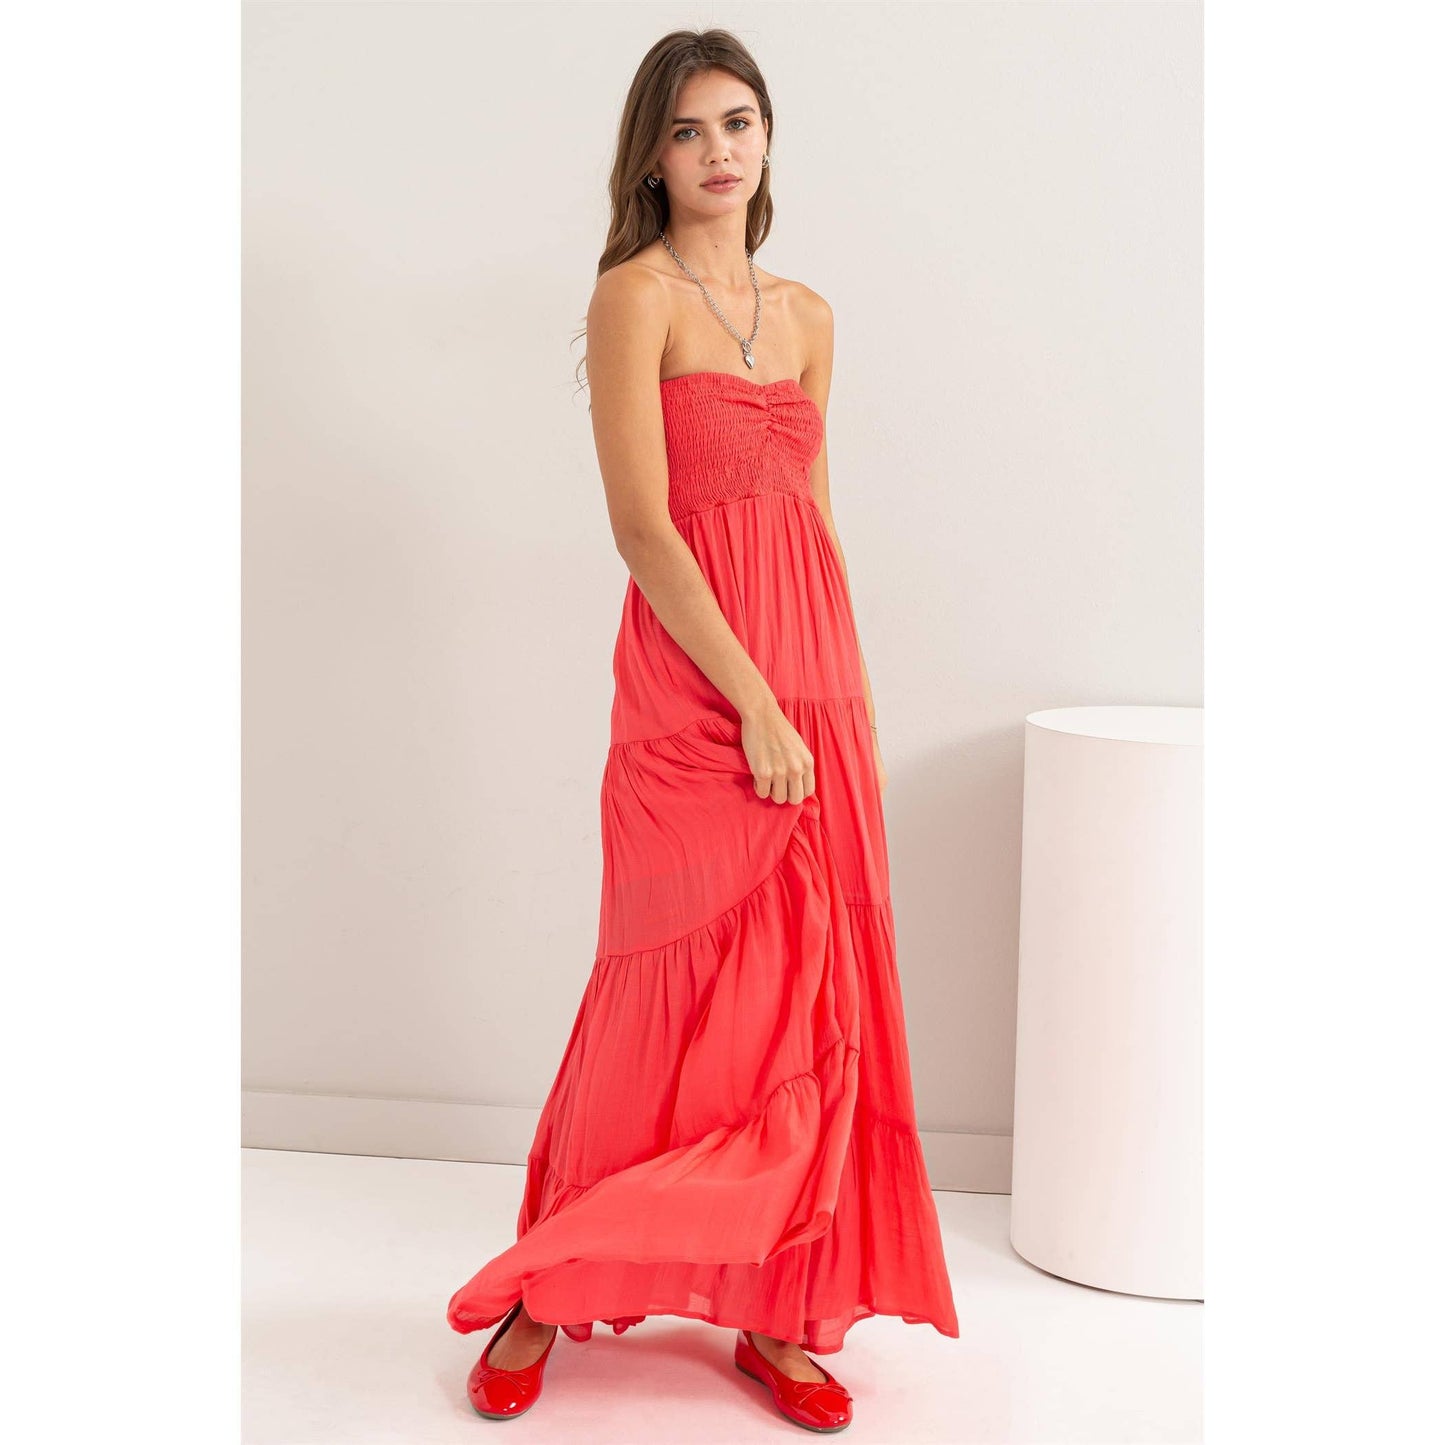 Smocked Strapless Tube Top Tiered Flowy Coral Maxi Dress